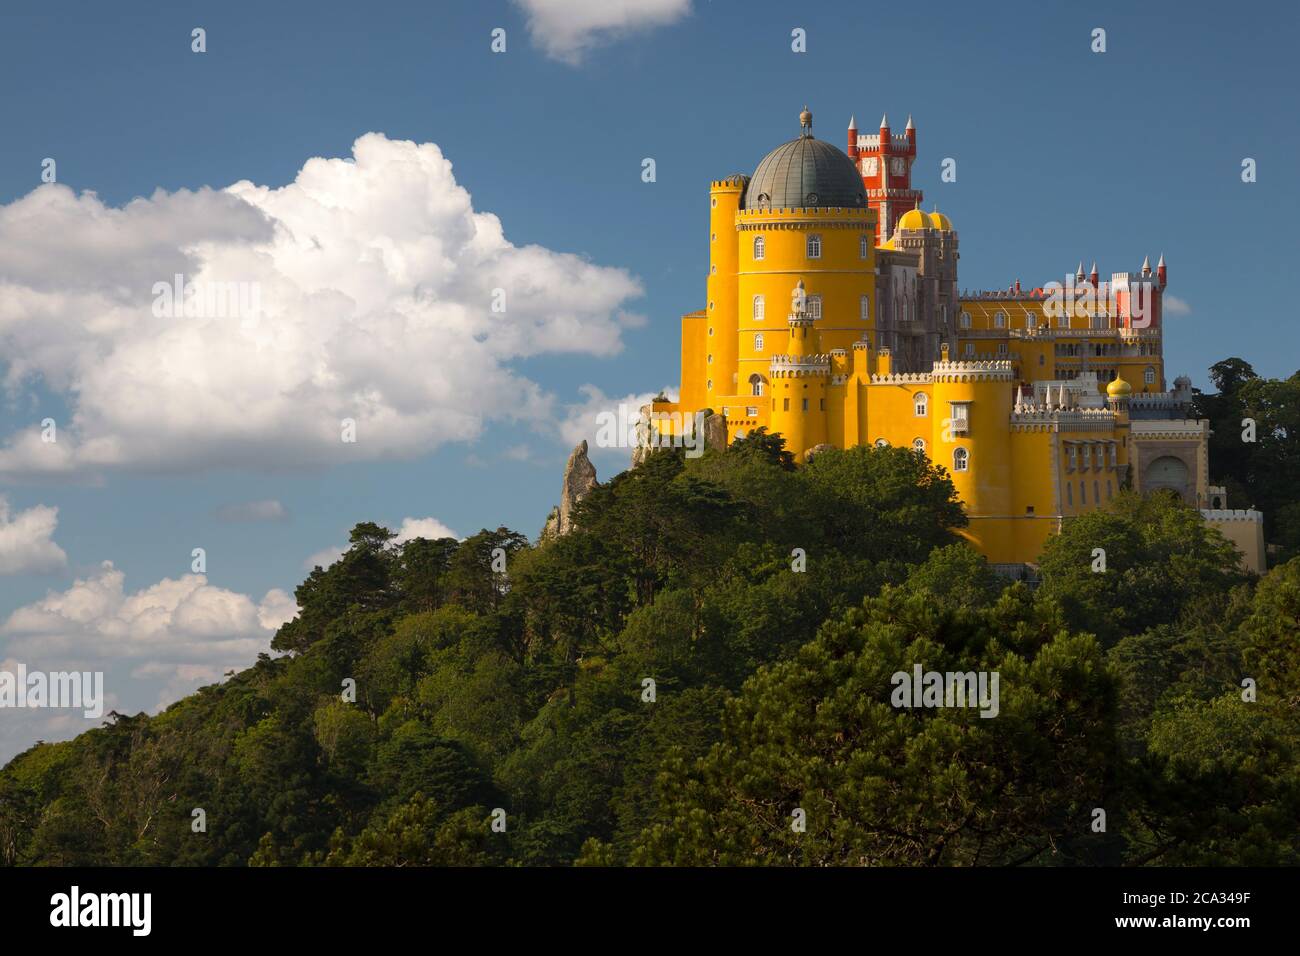 https://c8.alamy.com/comp/2CA349F/portugal-sintra-the-pena-palace-on-a-cliff-surrounded-by-forest-and-clouds-2CA349F.jpg